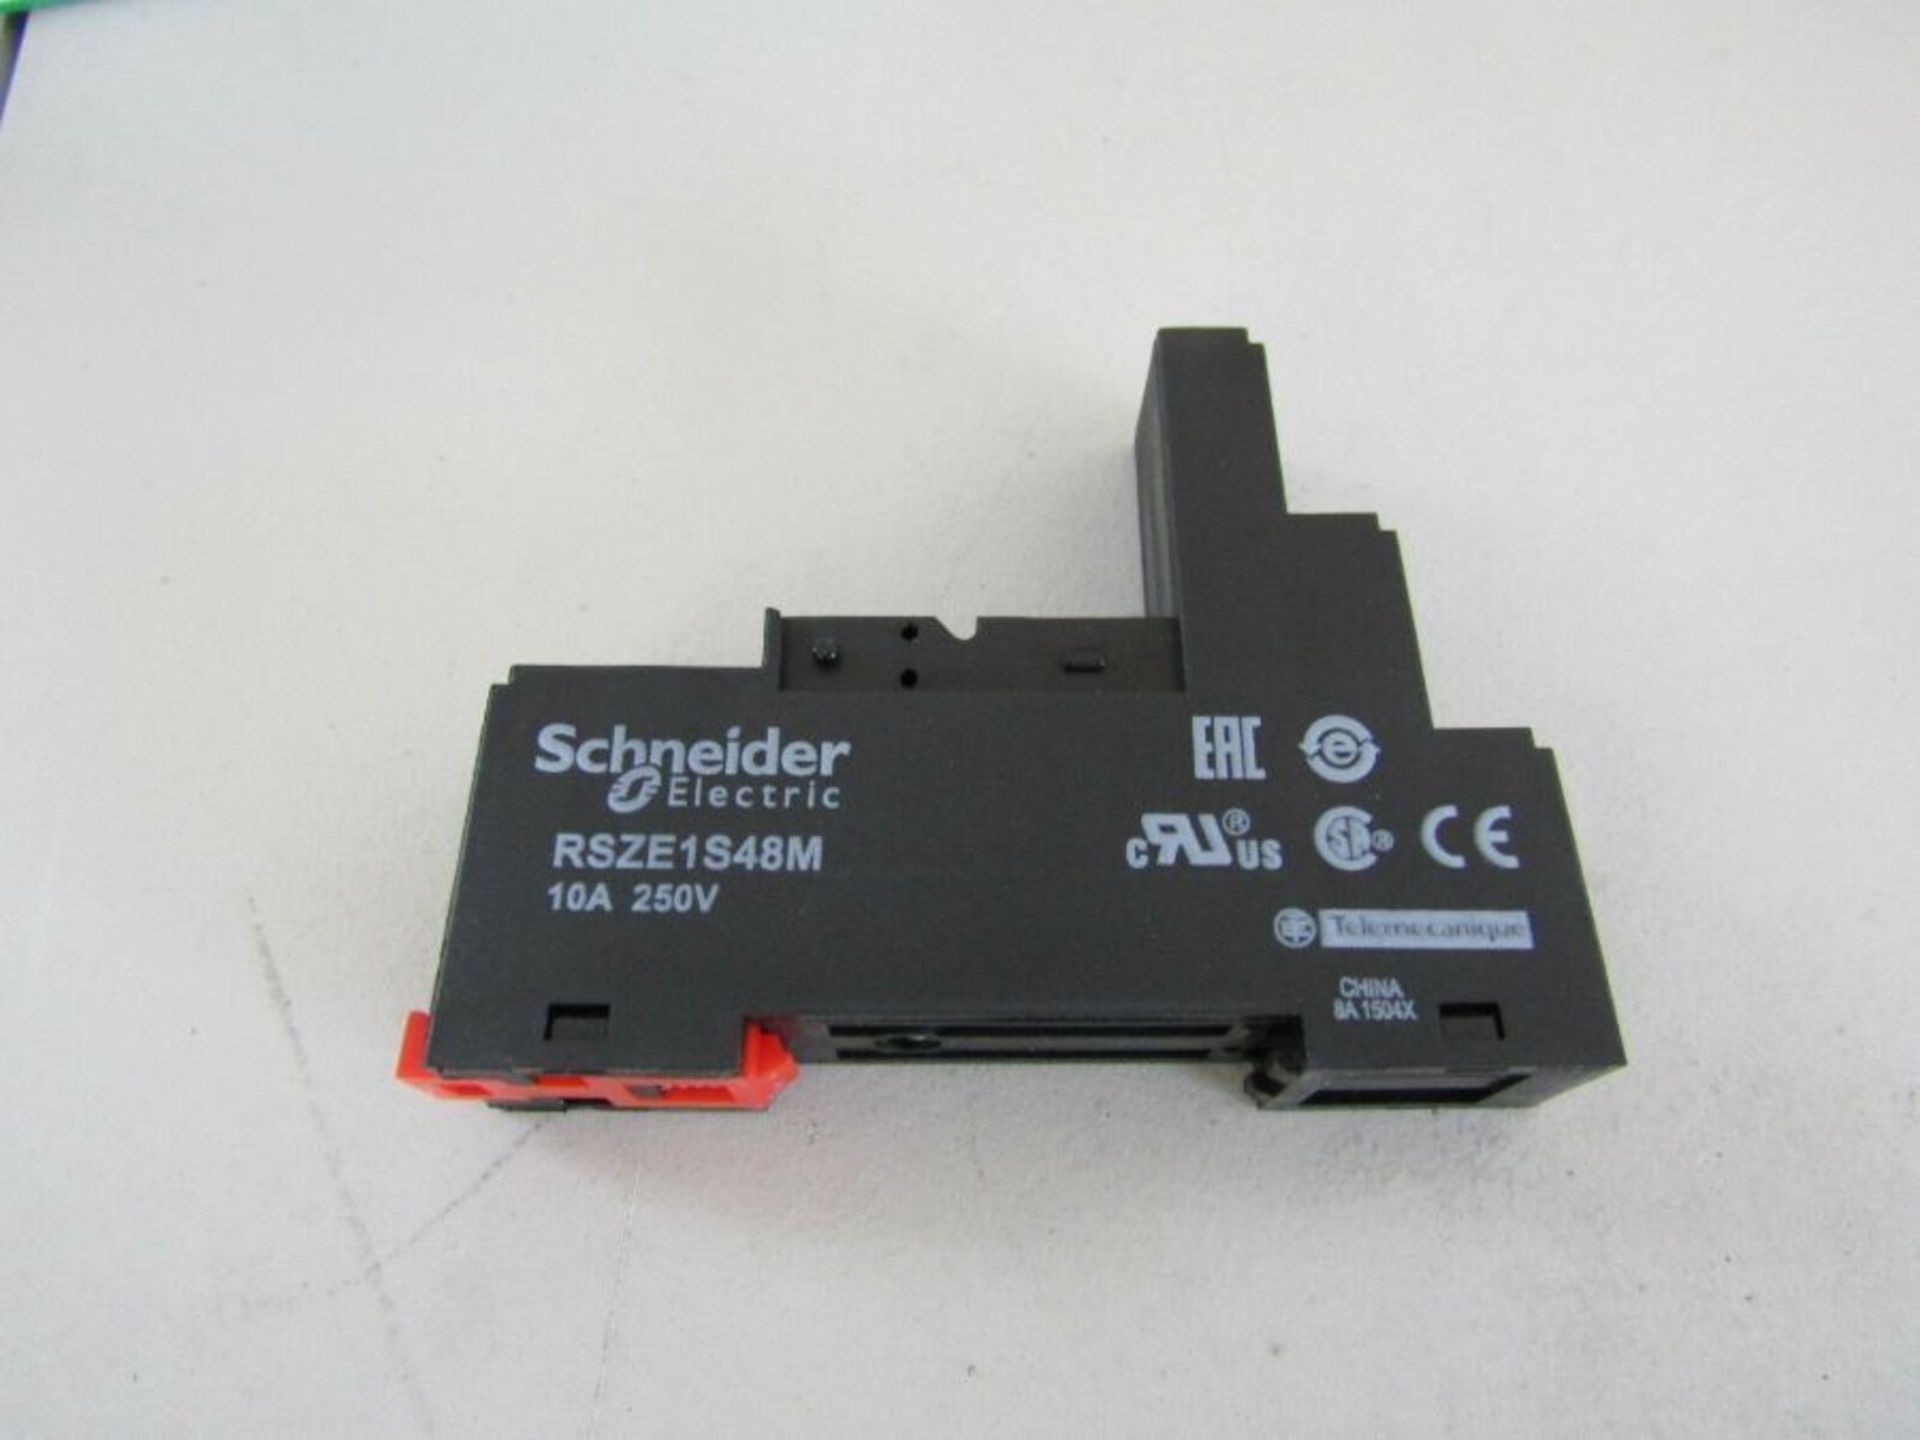 200 x SCHNEIDER RSZE1S48M Relay Socket for RSB Series - (20 boxes of 10) S2 - 8497667 - Image 2 of 6